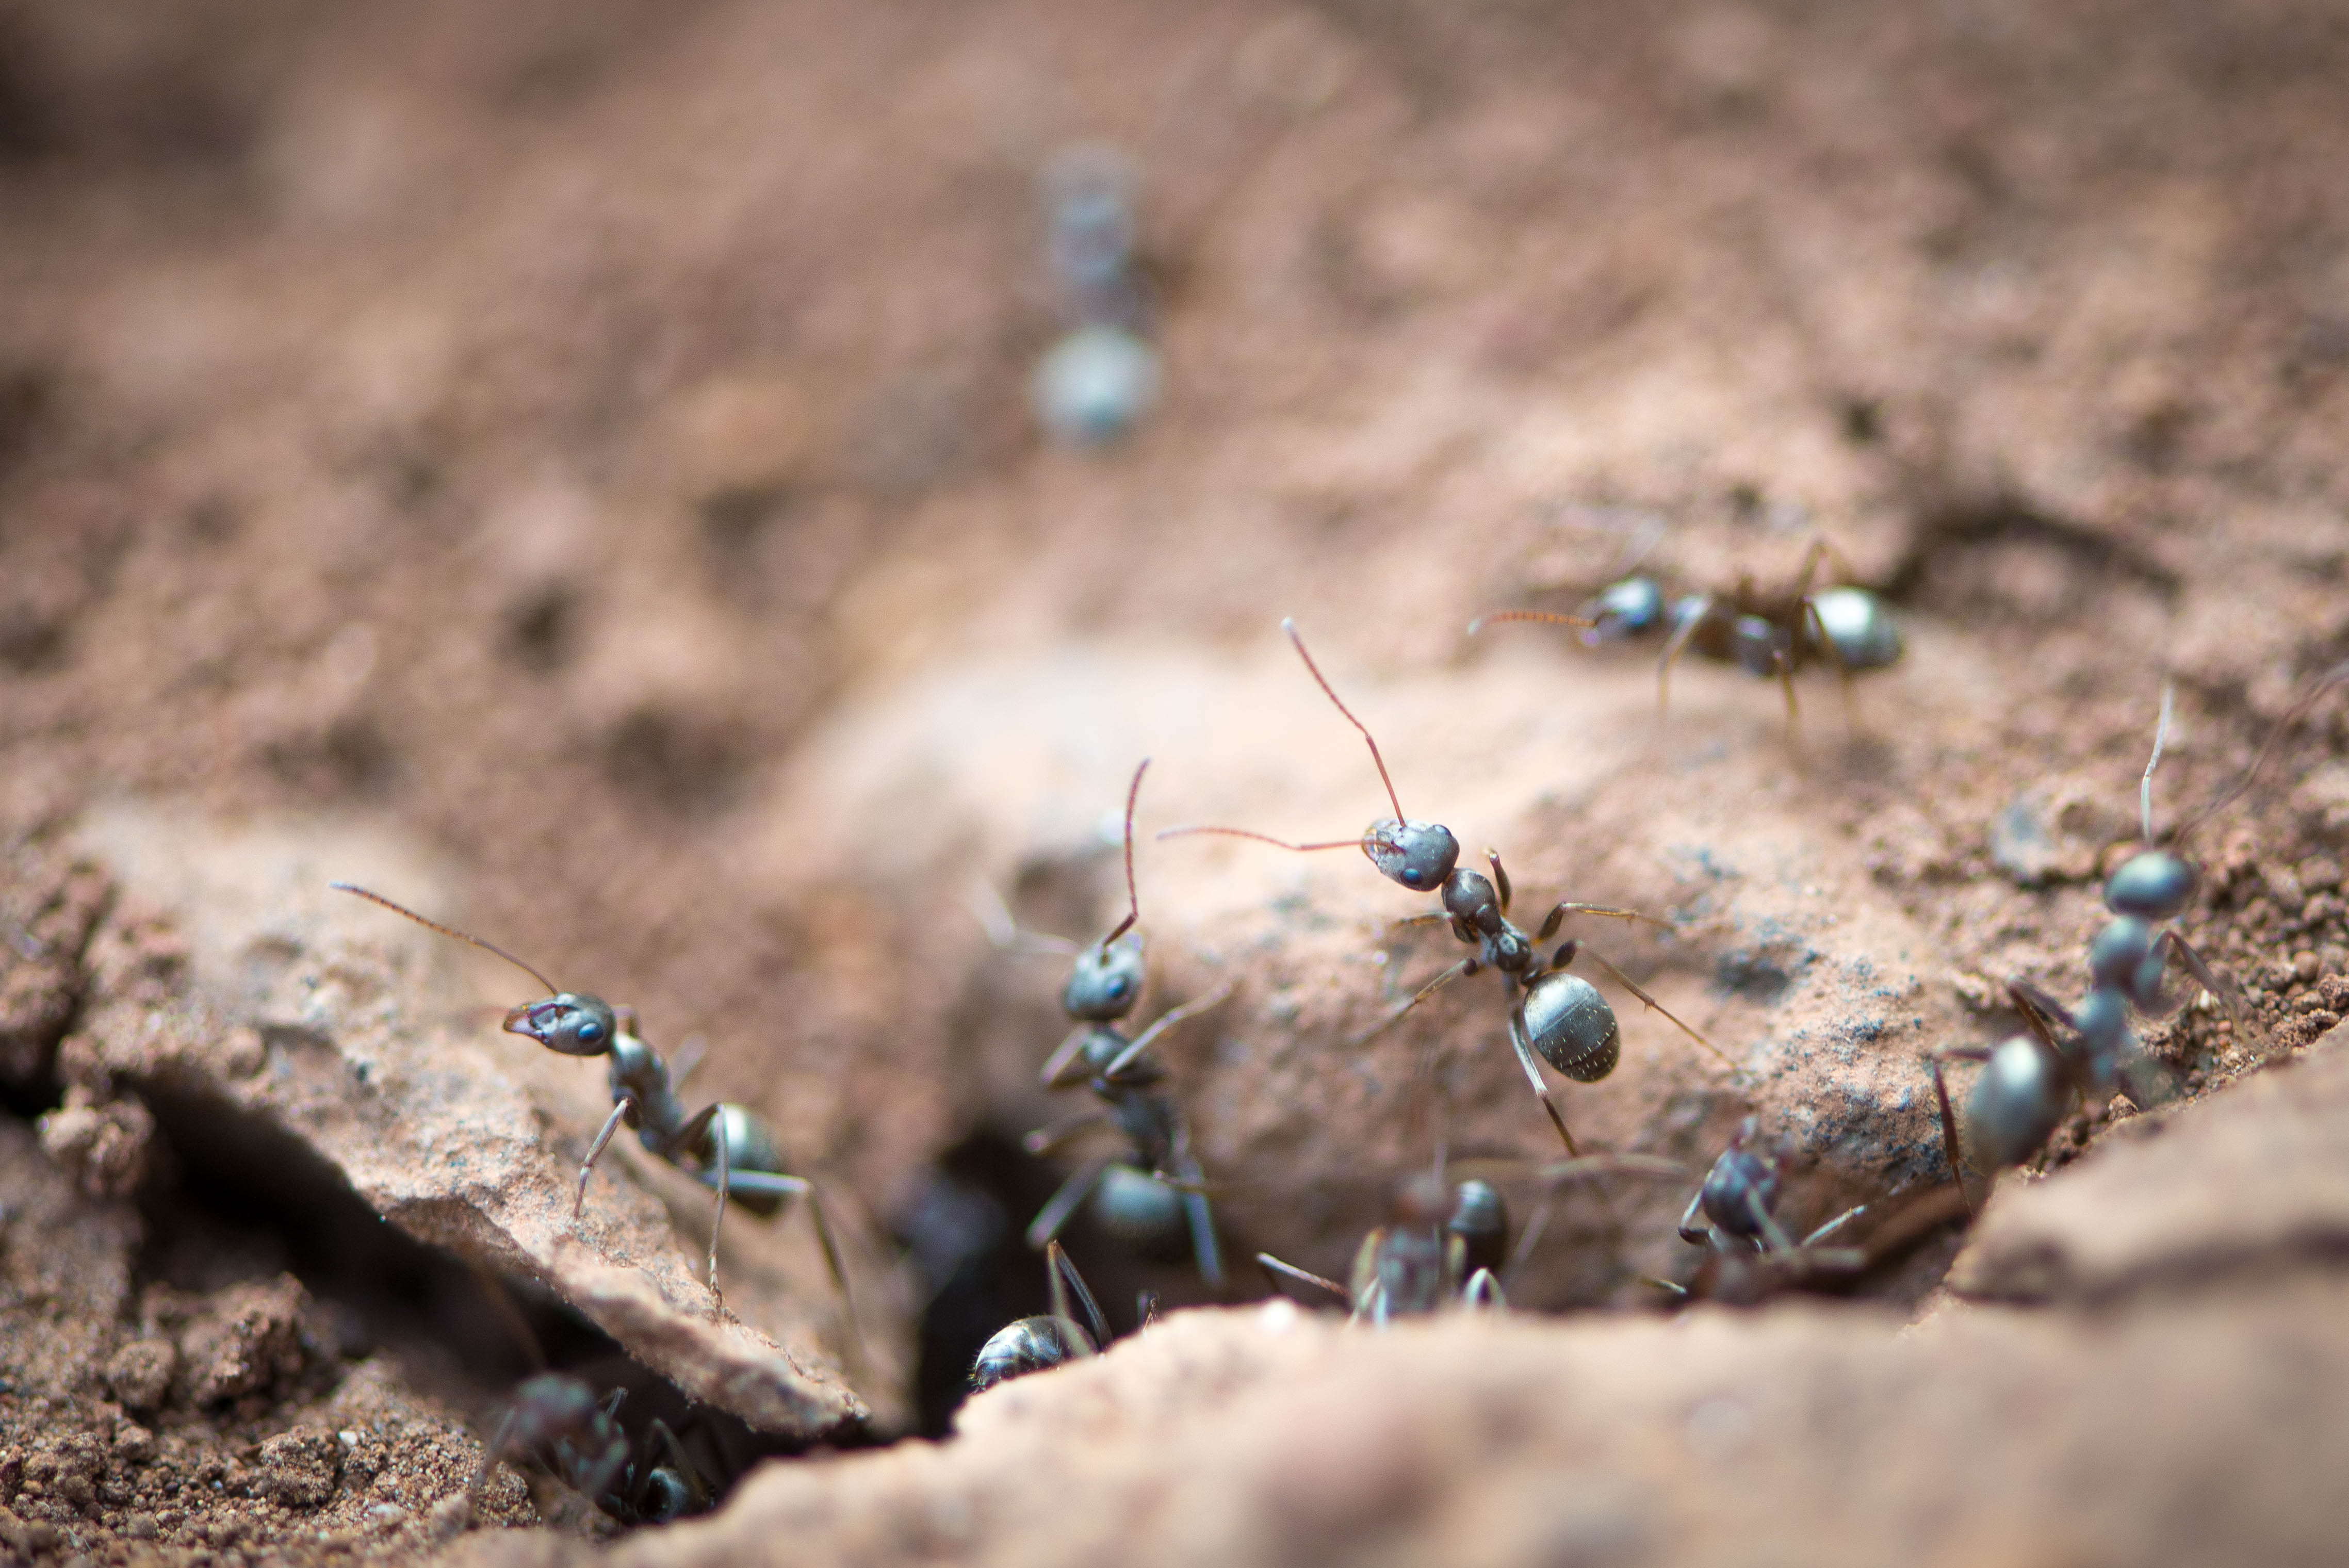 Formica ants at their nest entrance